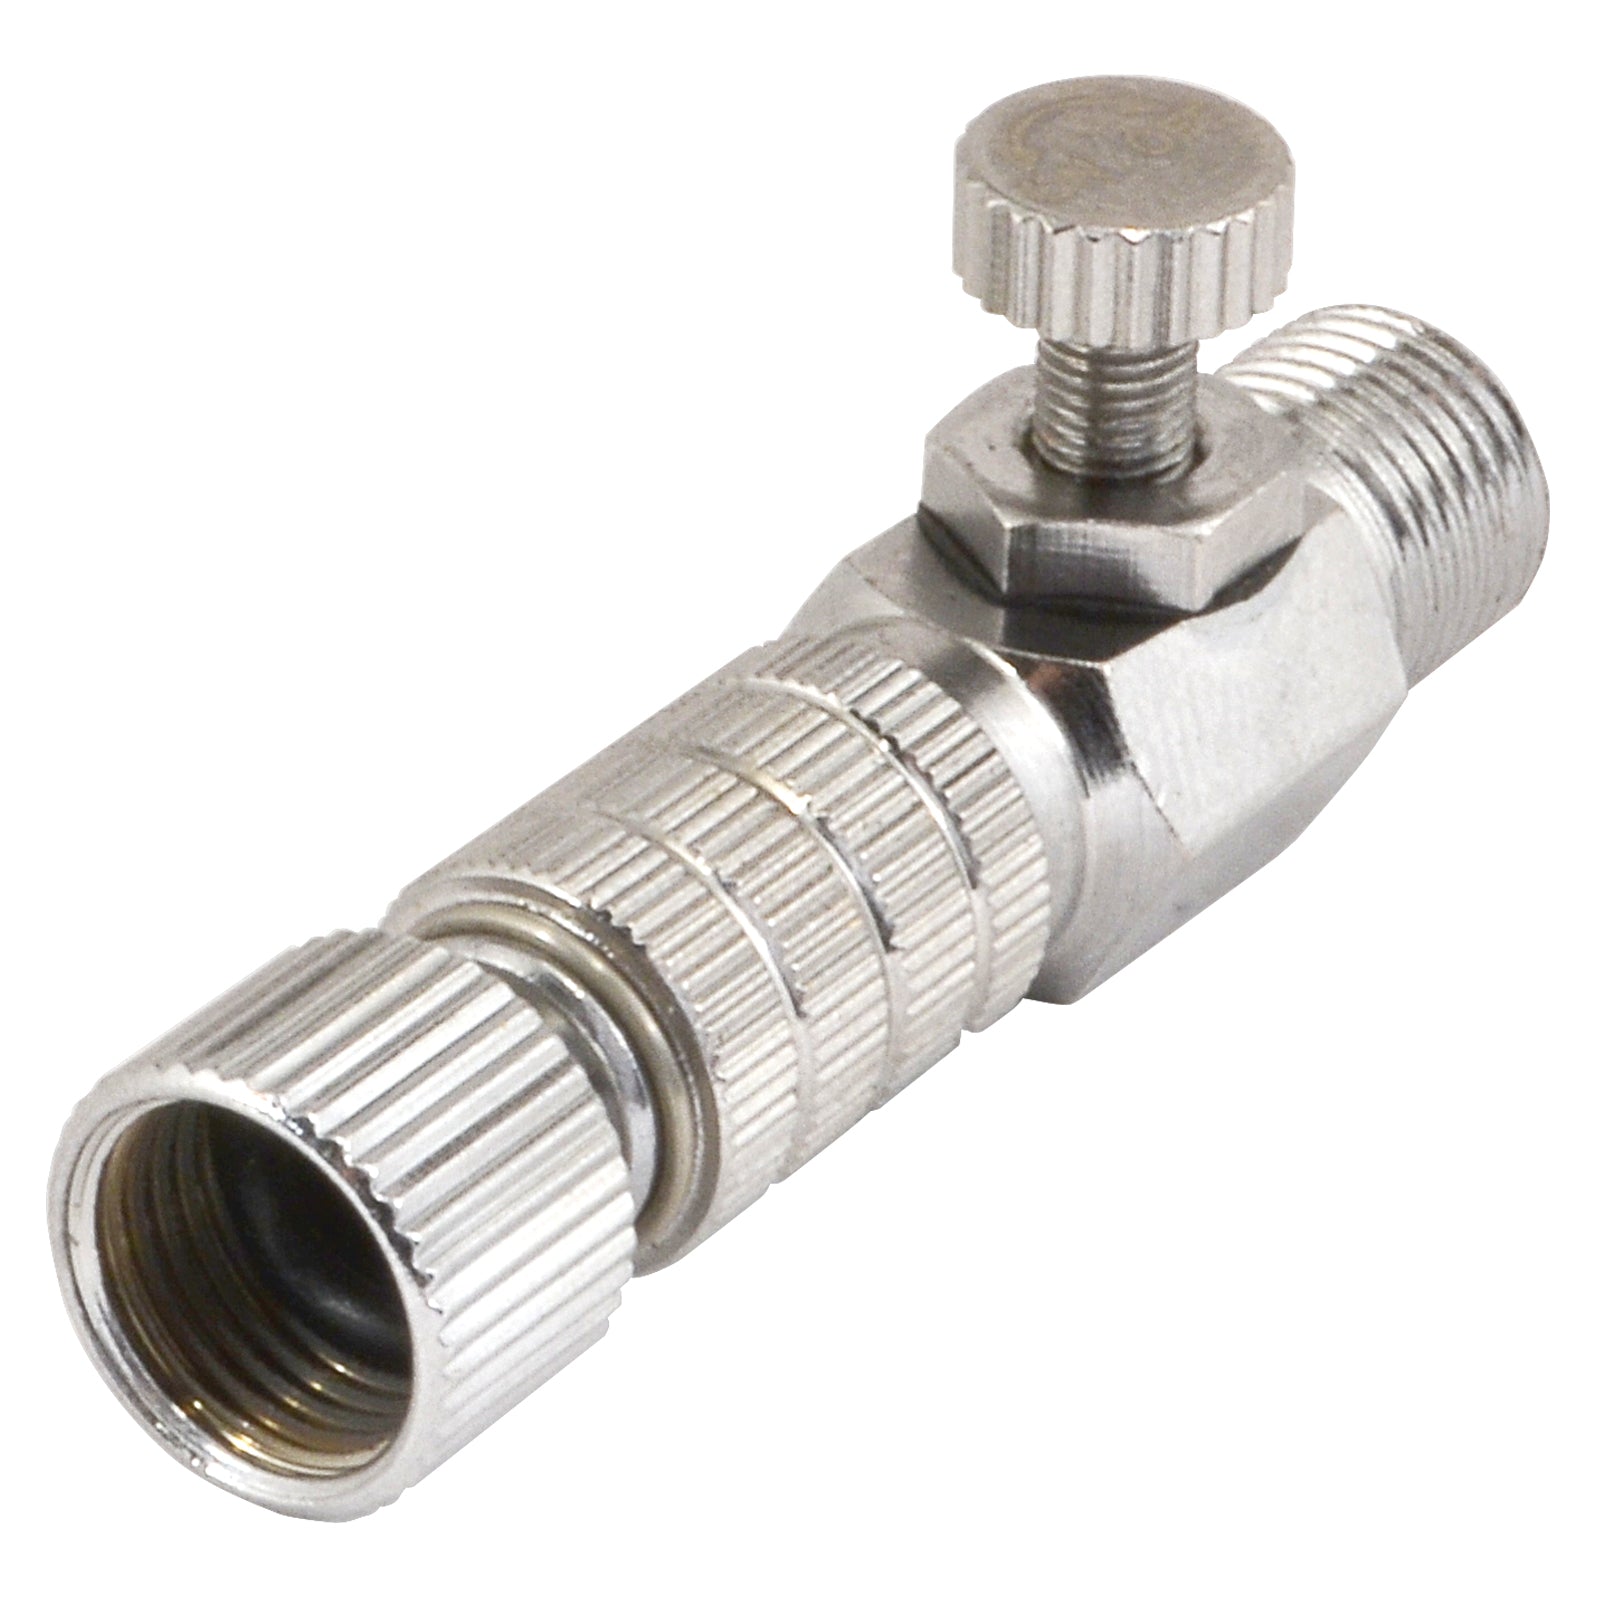 Pressure Reducing Valve for Airbrushes - Micro - Mark Airbrush Accessories